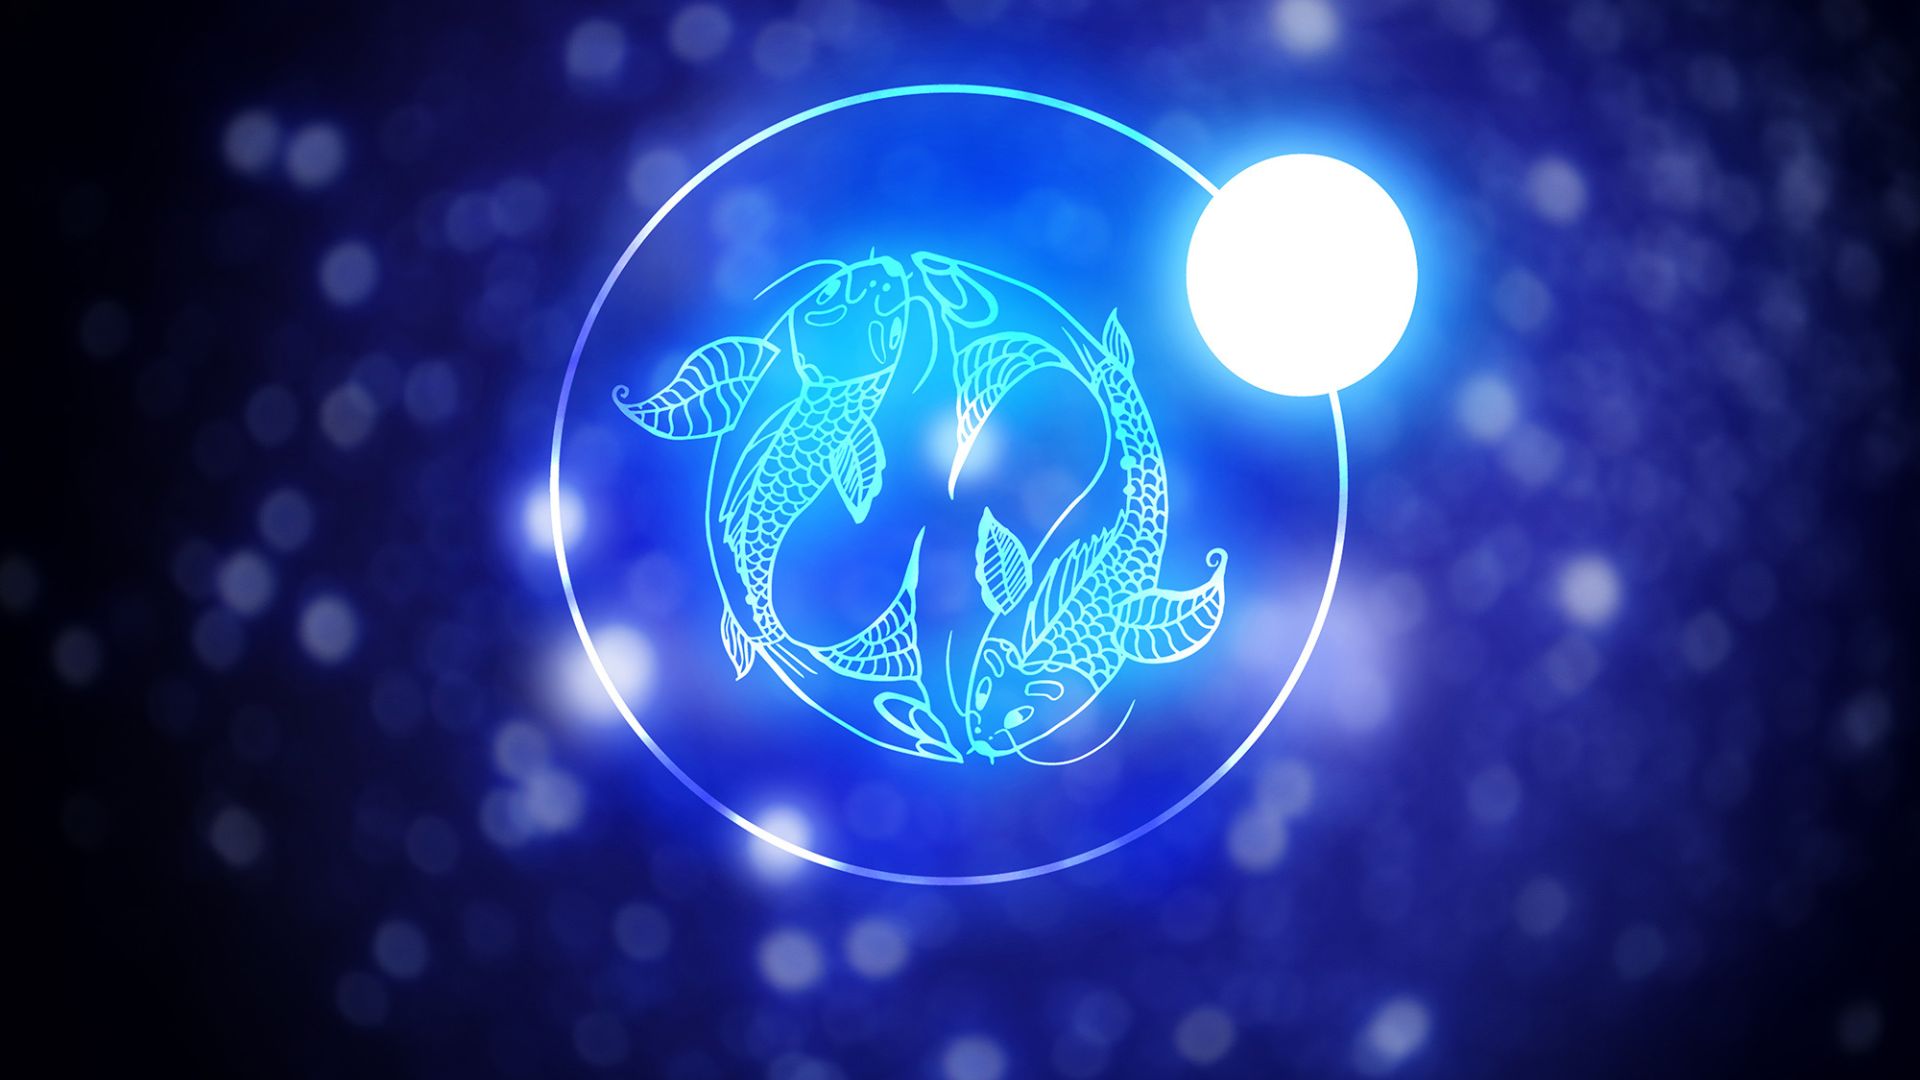 Blue Fishes Representing Pisces Signs